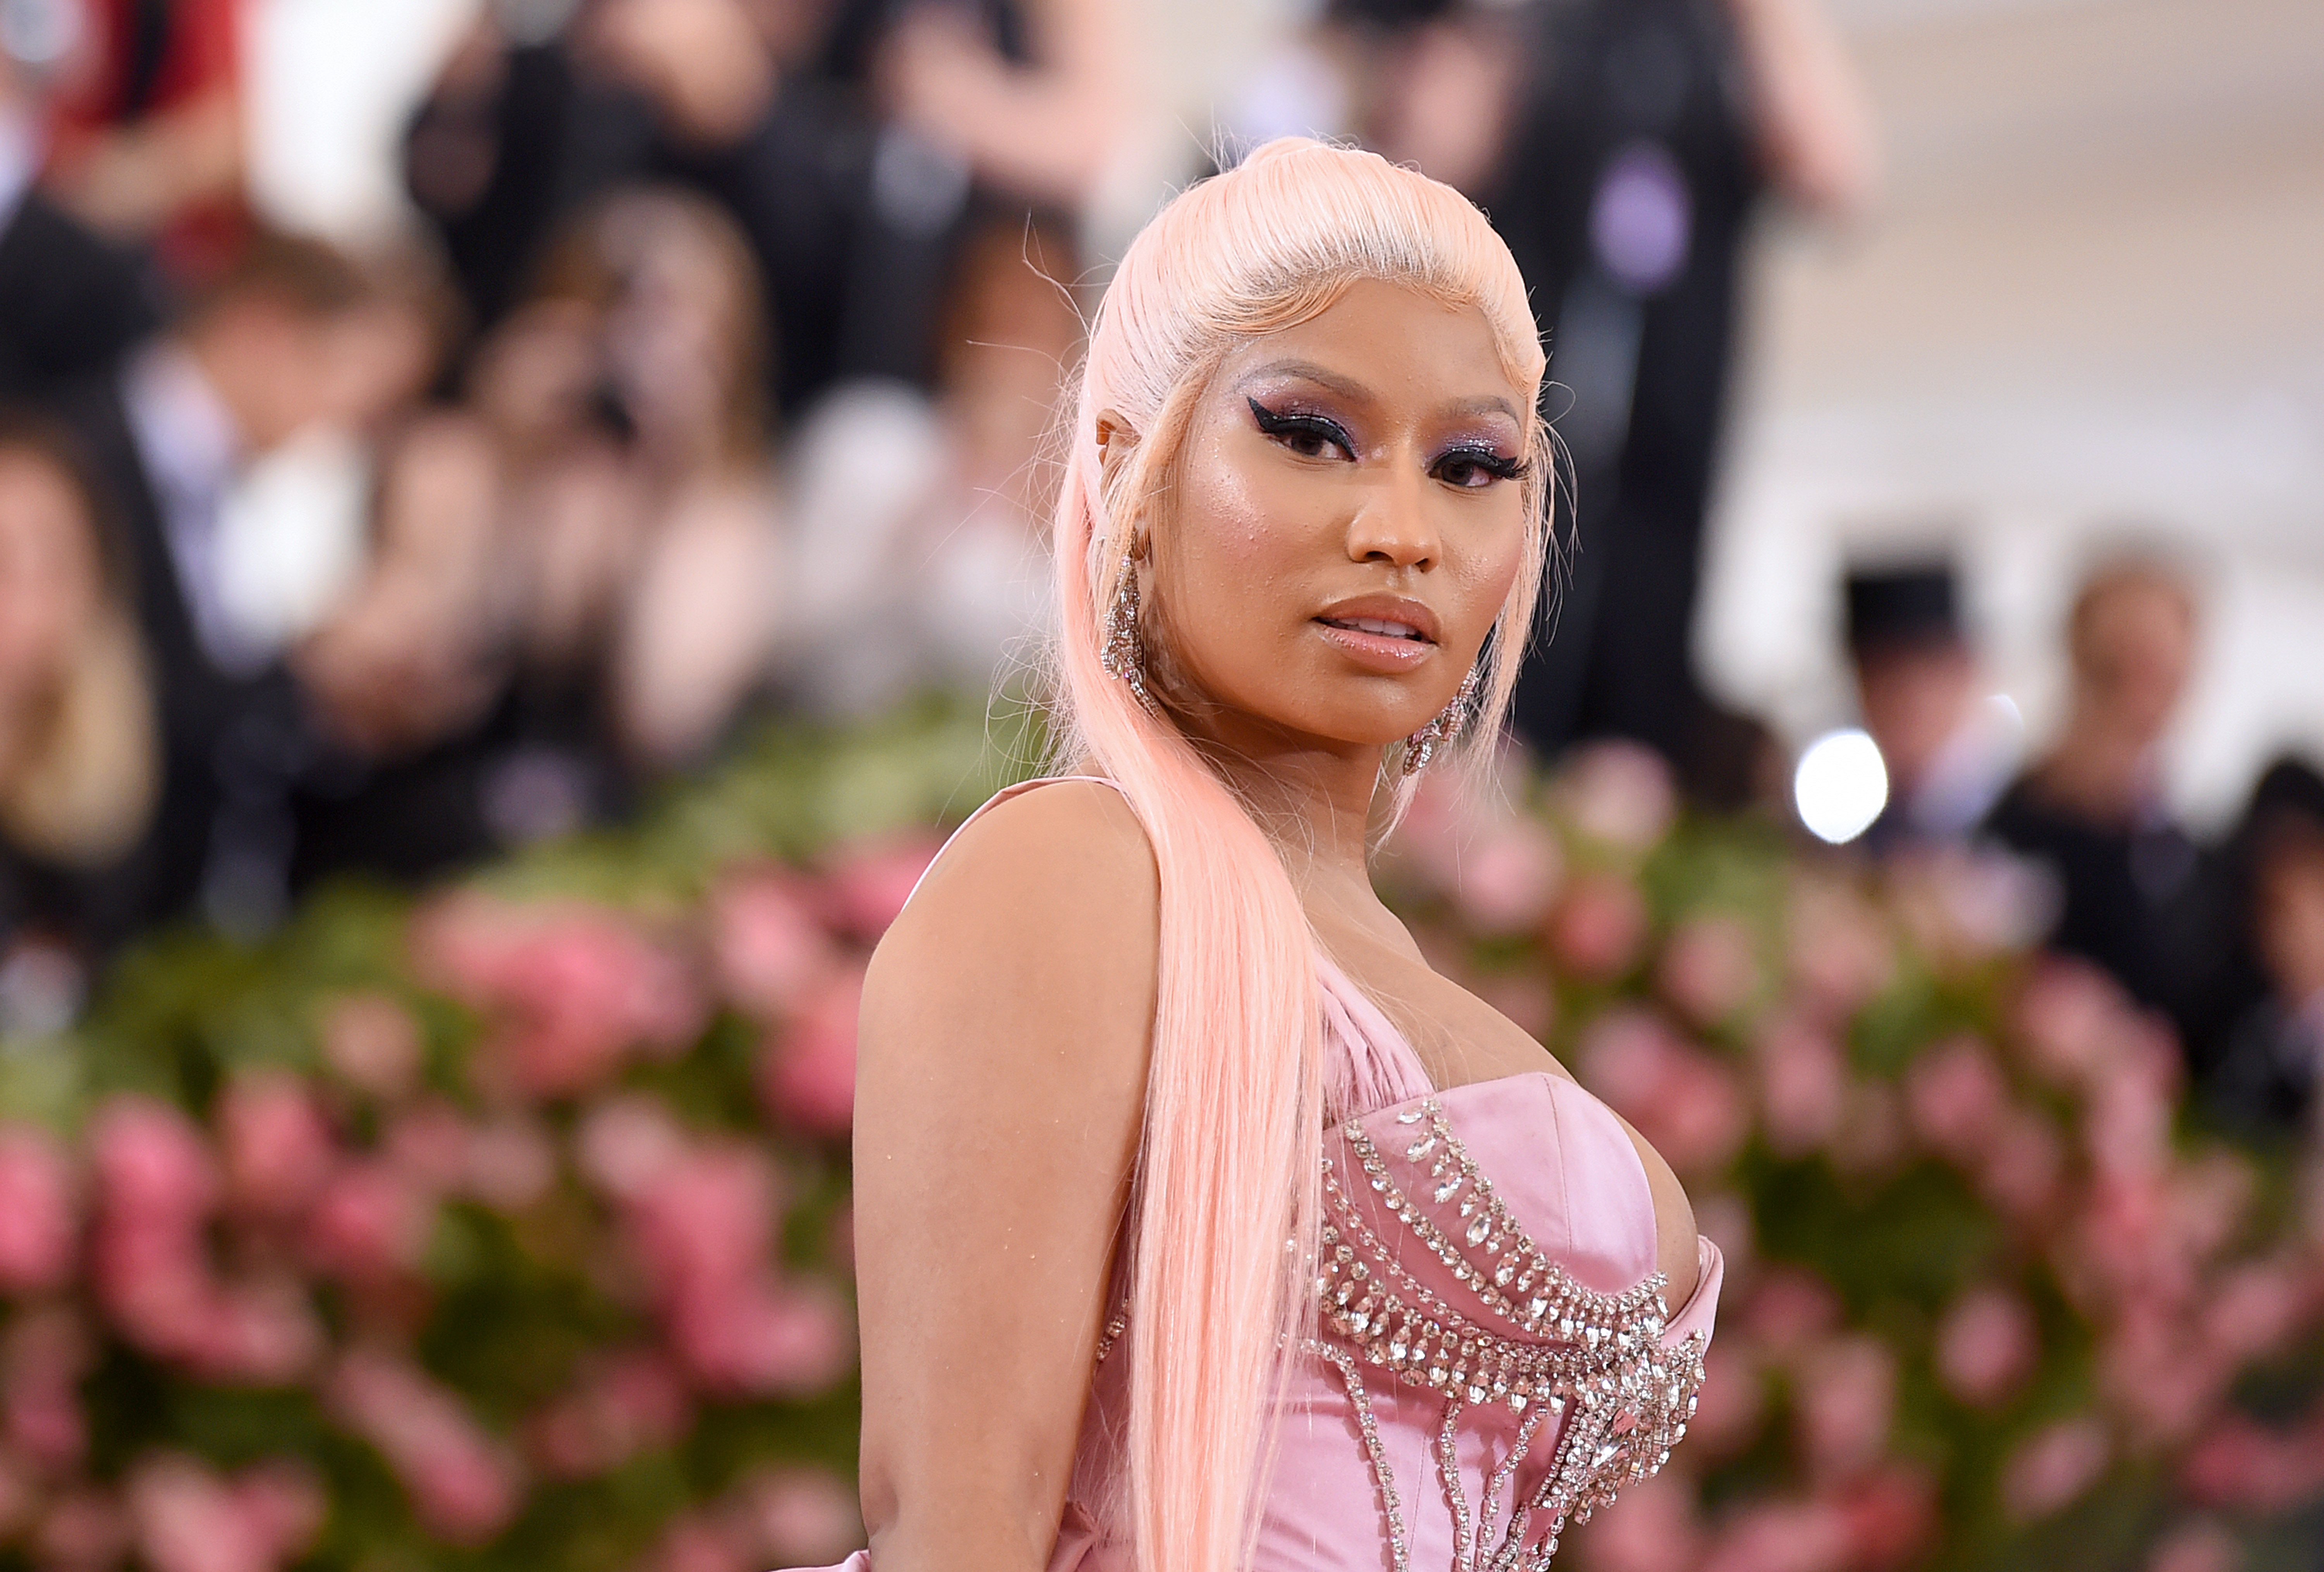 Nicki Minaj Strongly Hints At Pregnancy On Chance The Rapper’s “Zanies And Fools”